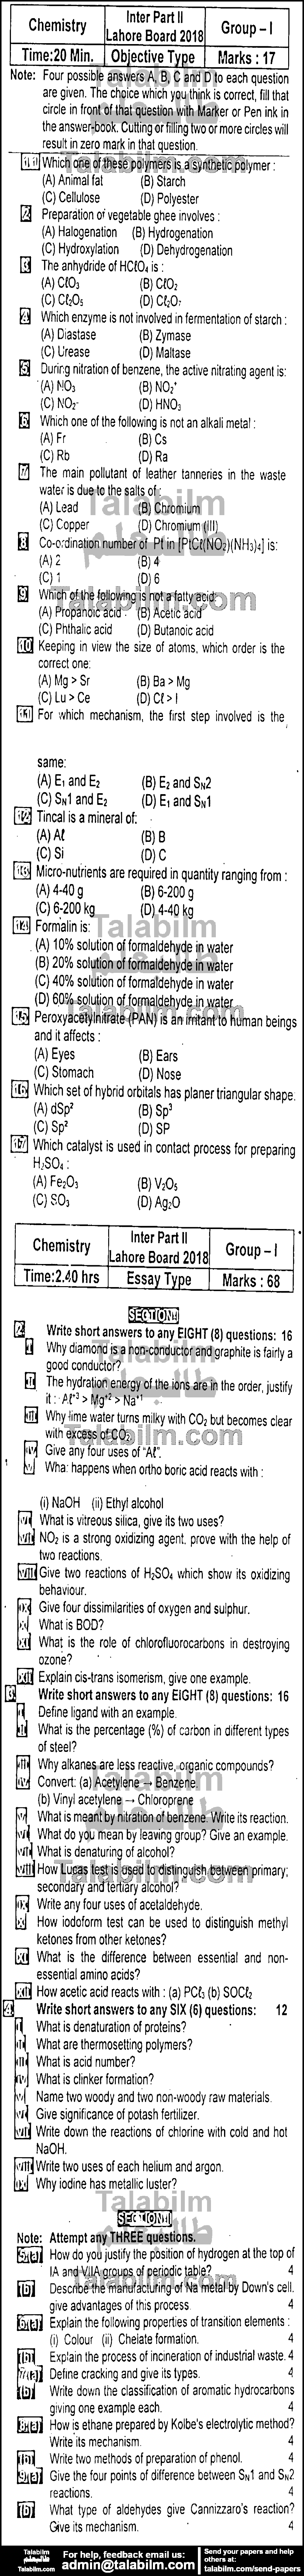 Chemistry 0 past paper for Group-I 2018